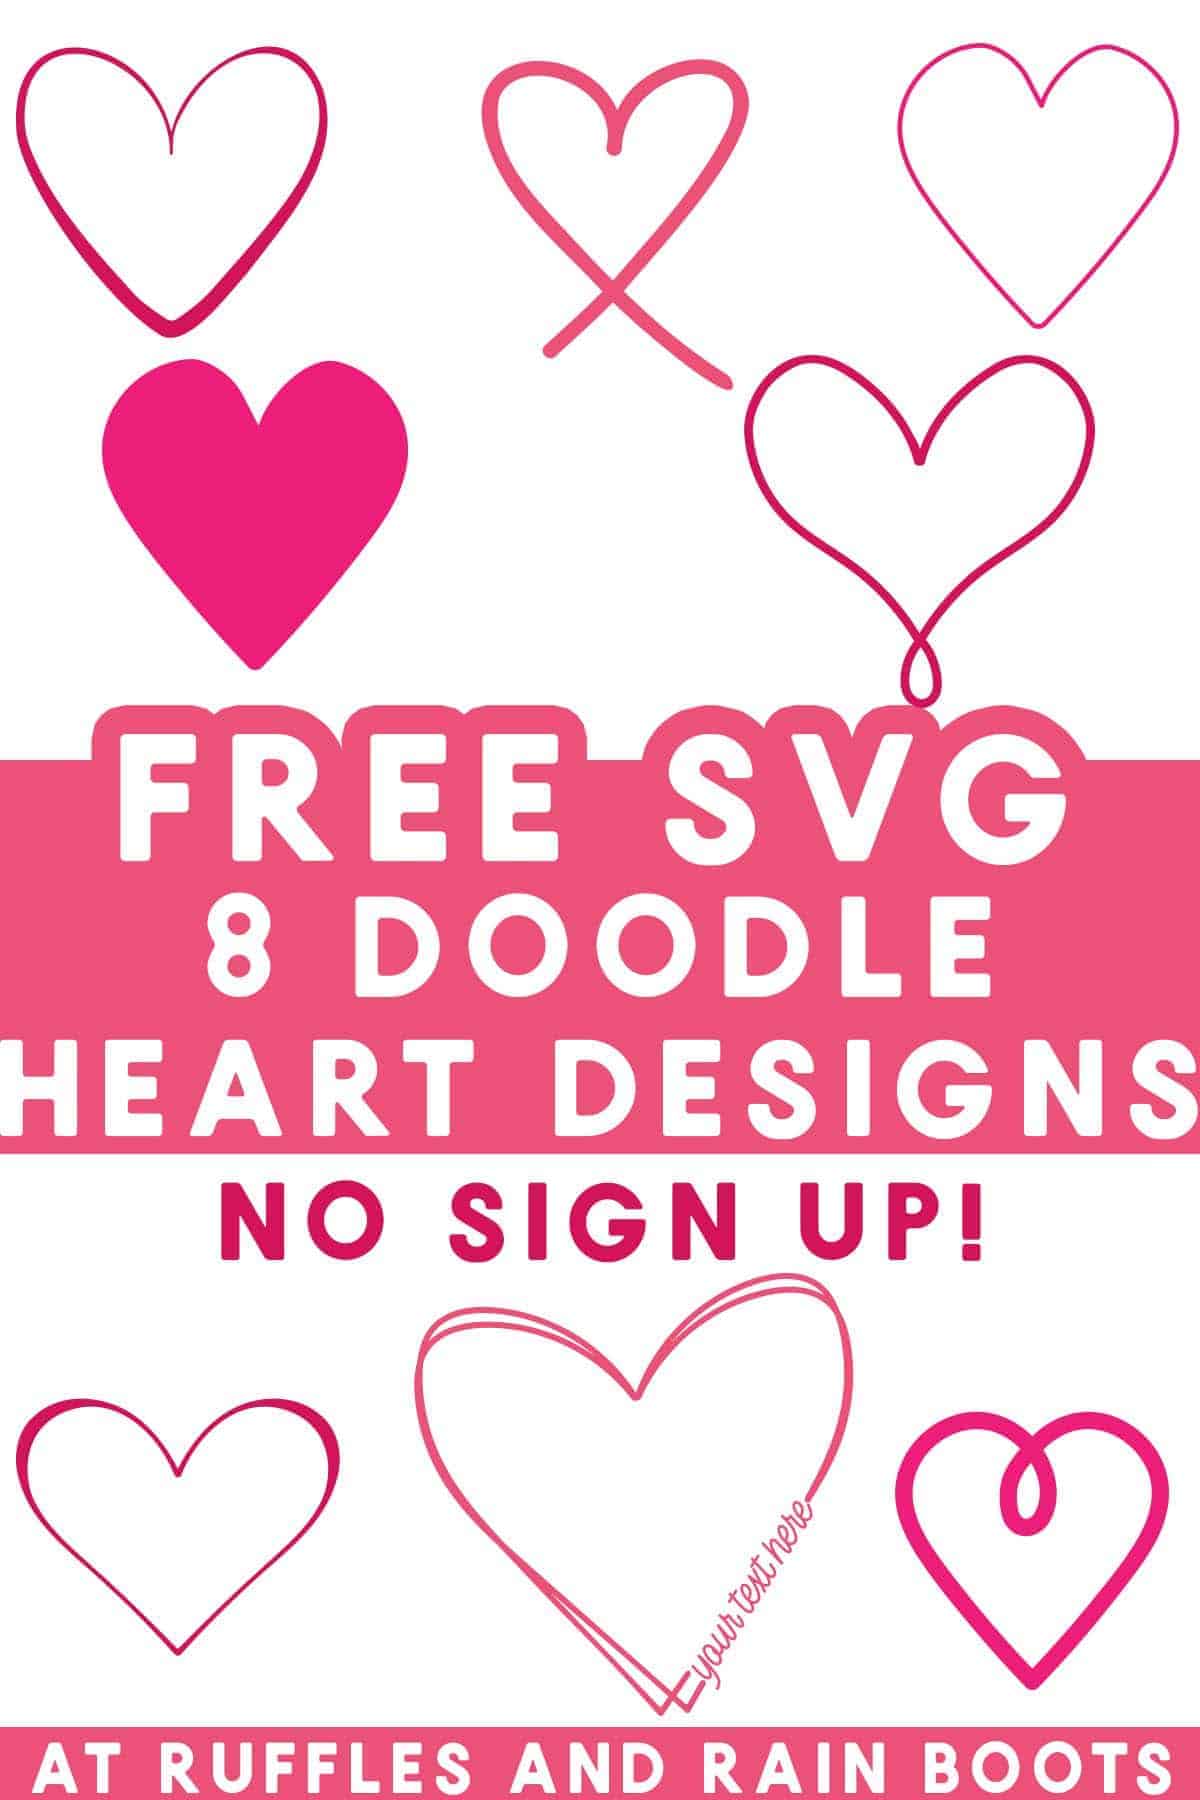 Vertical split image of 8 doodle heart SVG designs with commercial use.